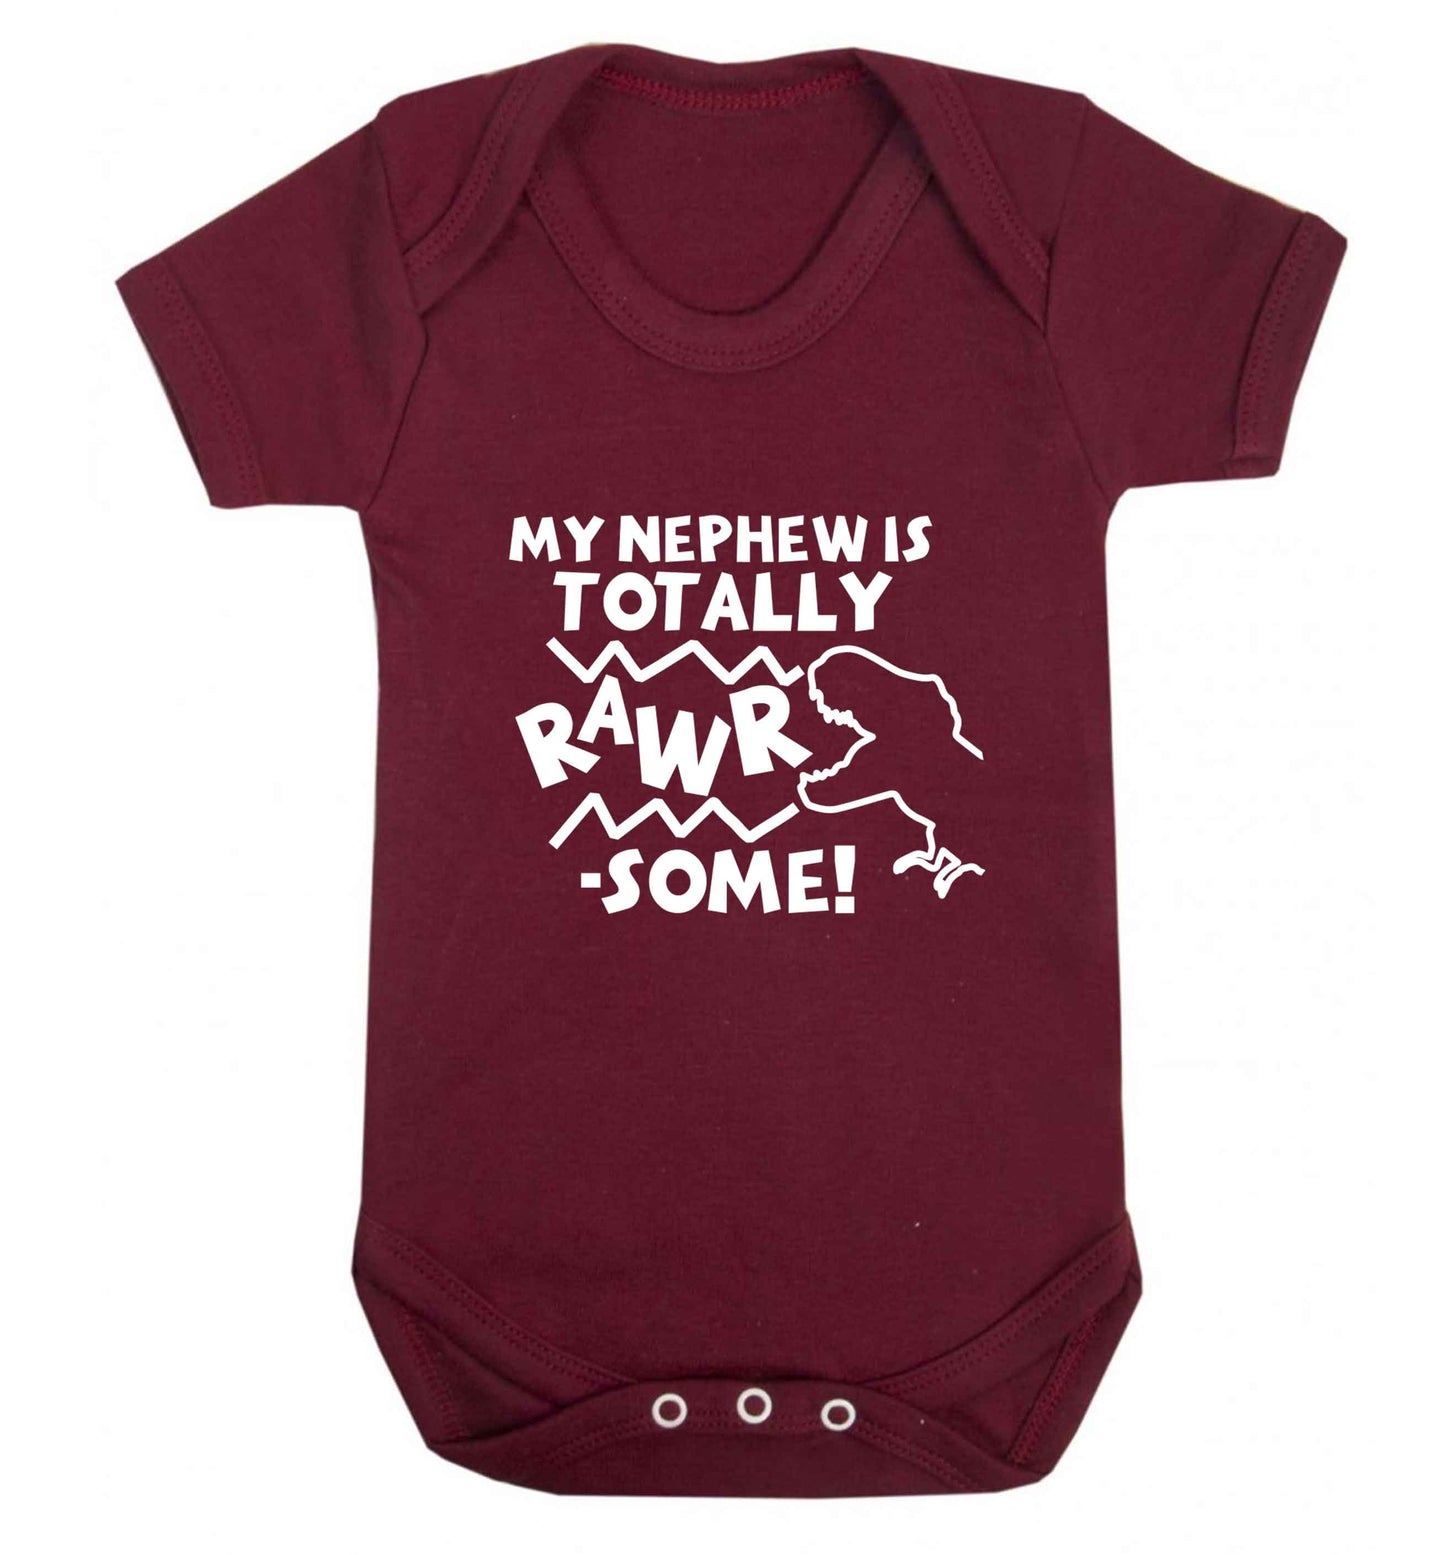 My nephew is totally rawrsome baby vest maroon 18-24 months